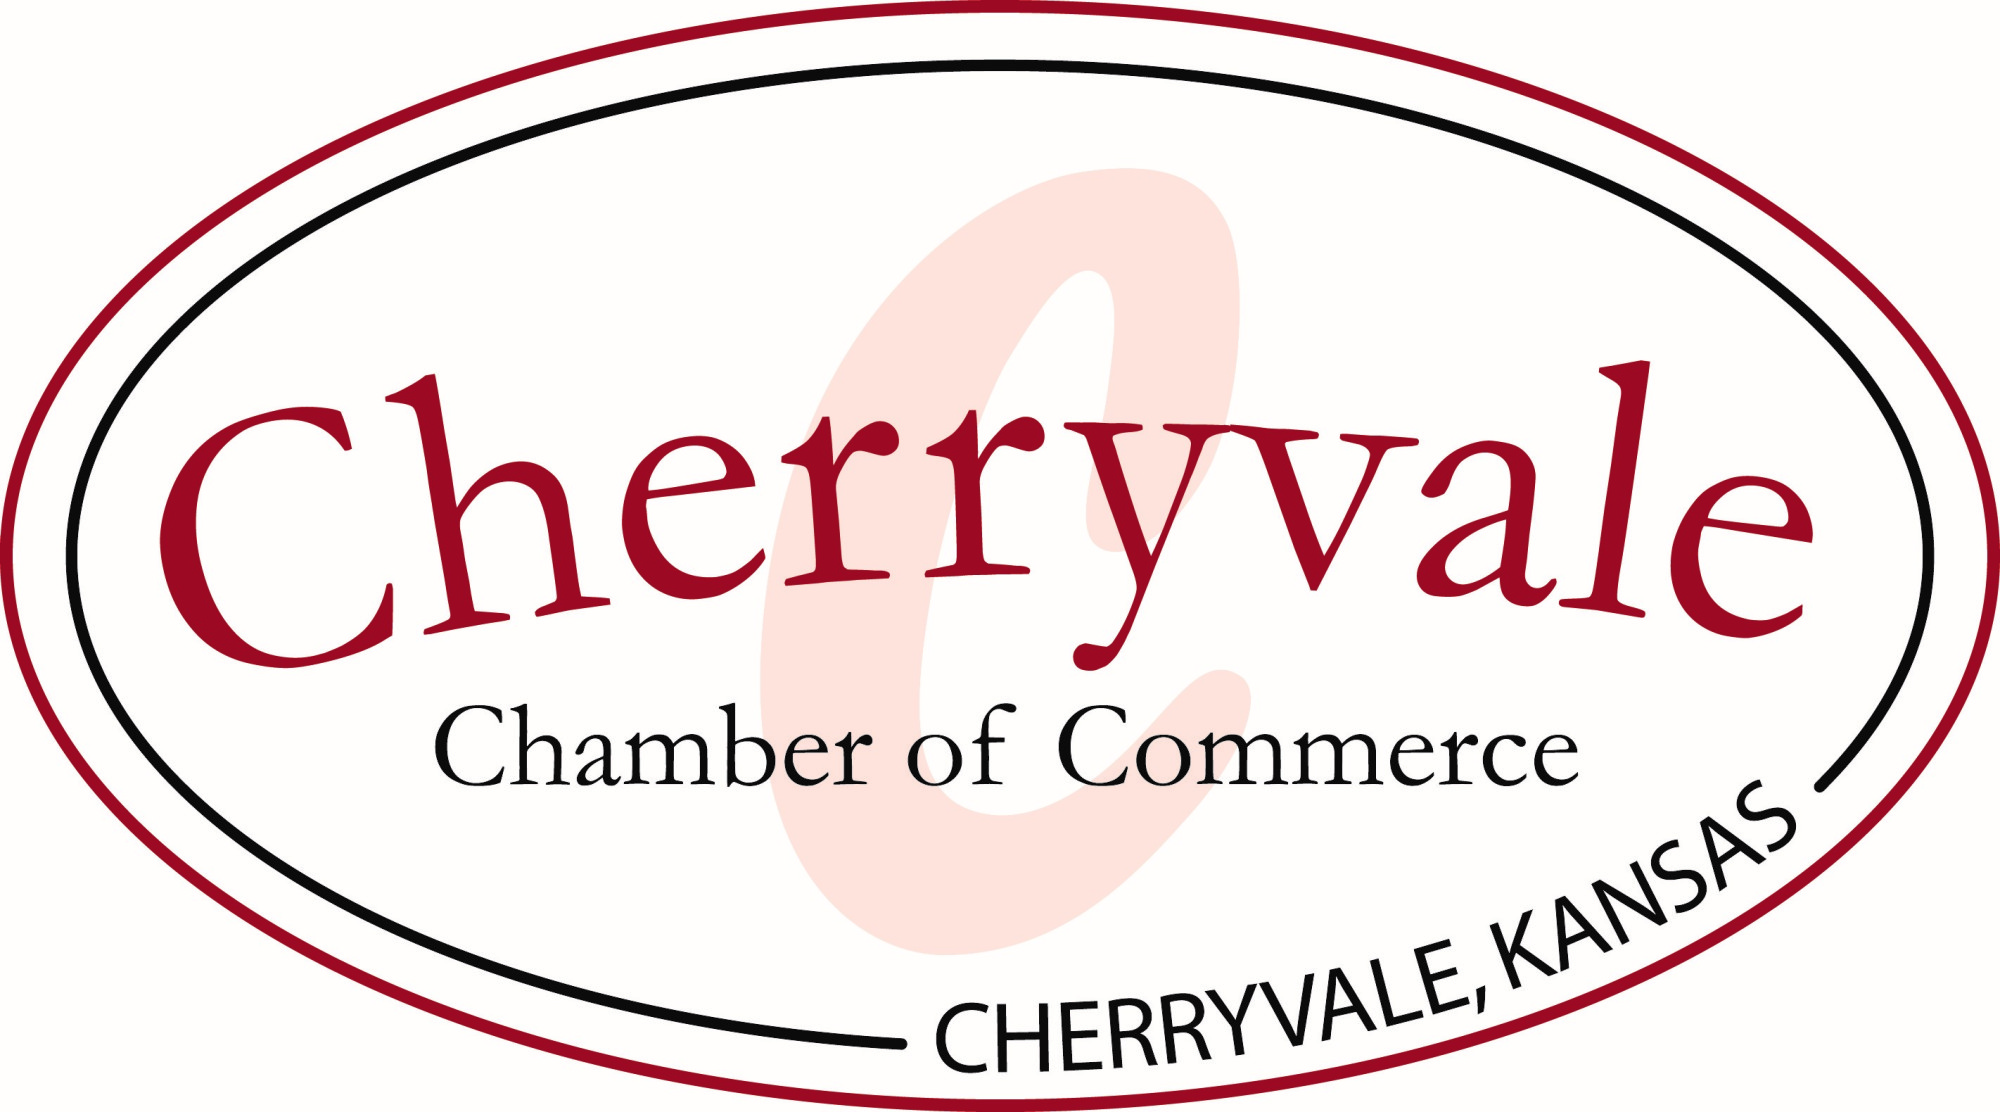 Cherryvale Chamber of Commerce's Image